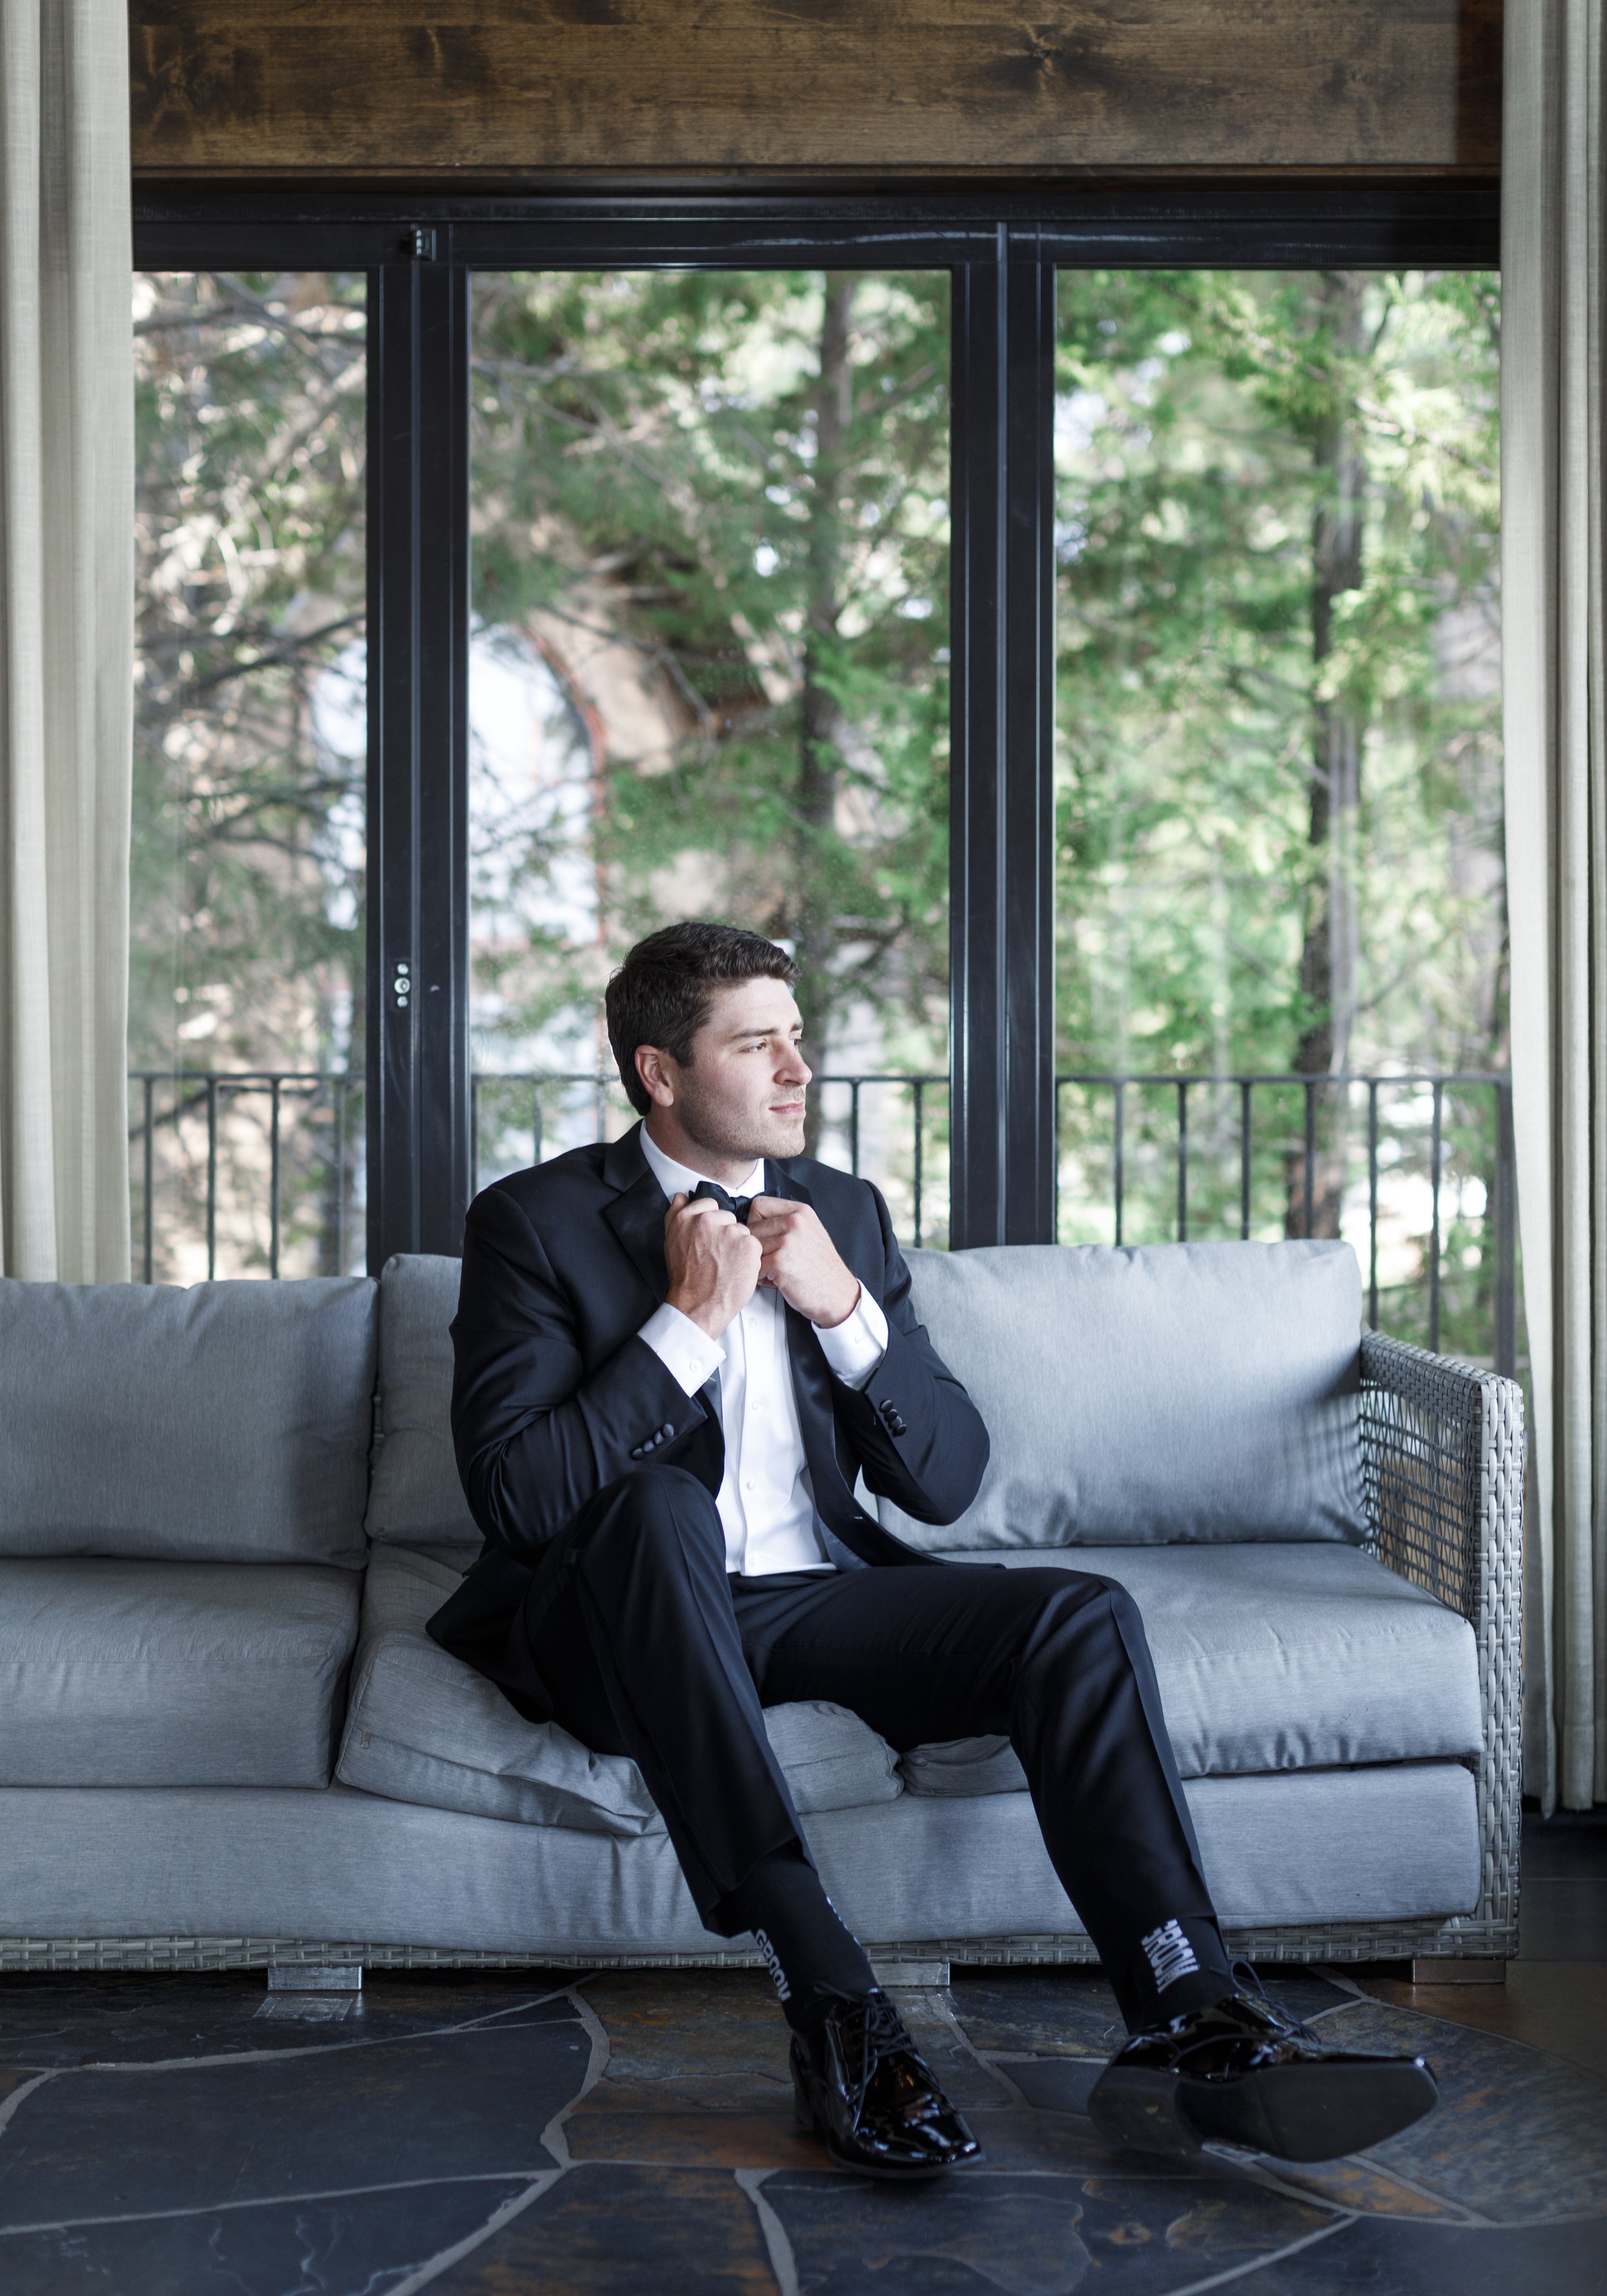  Groom on a couch tying his bowtie in Tahoe captured by Savanna Richardson Photography. Lake Tahoe wedding ideas groom getting ready black bowtie #savannarichardsonphotography #tahoewedding #lakesidewedding #outdoorwedding #summerwedding #laketahoe 